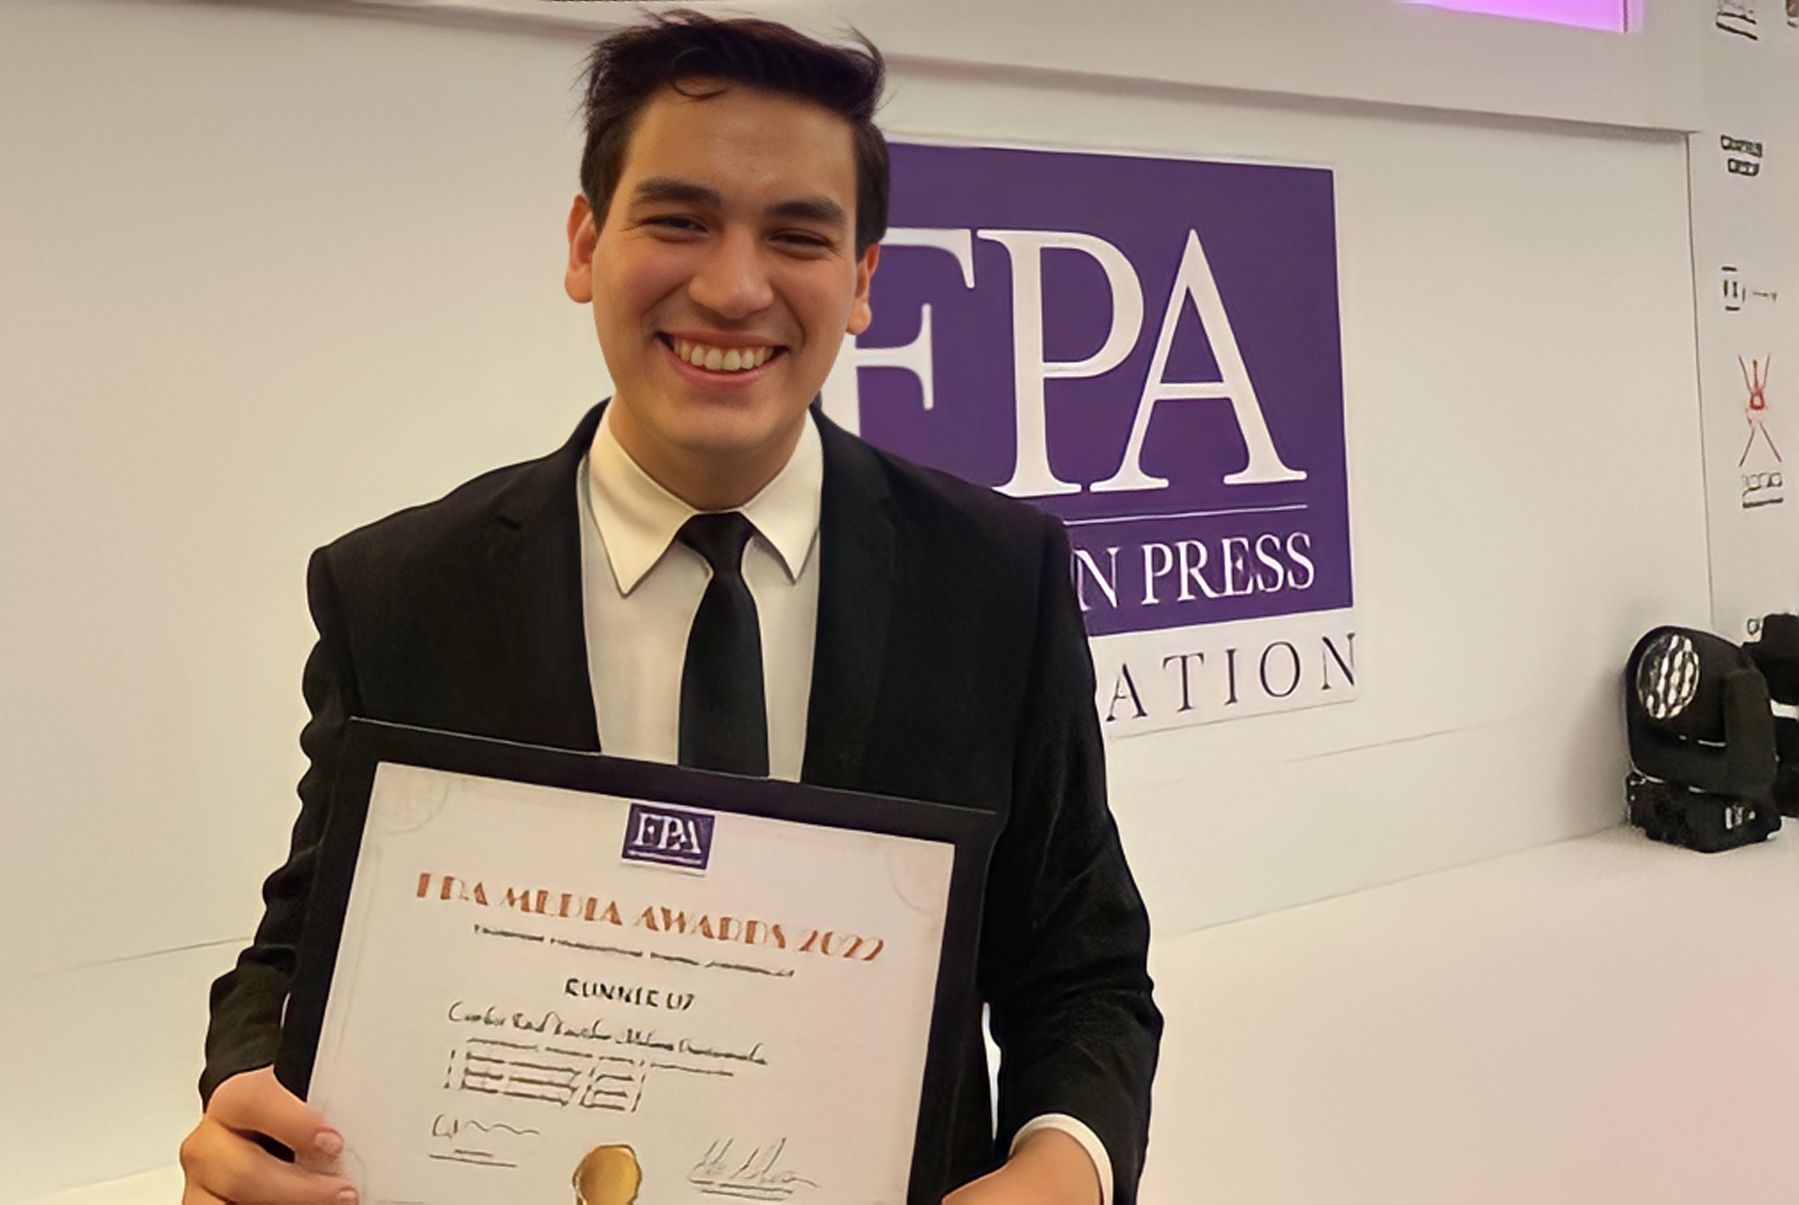 Guatemalan journalist Carlos Kestler accepting an award by the Foreign Press Association of London